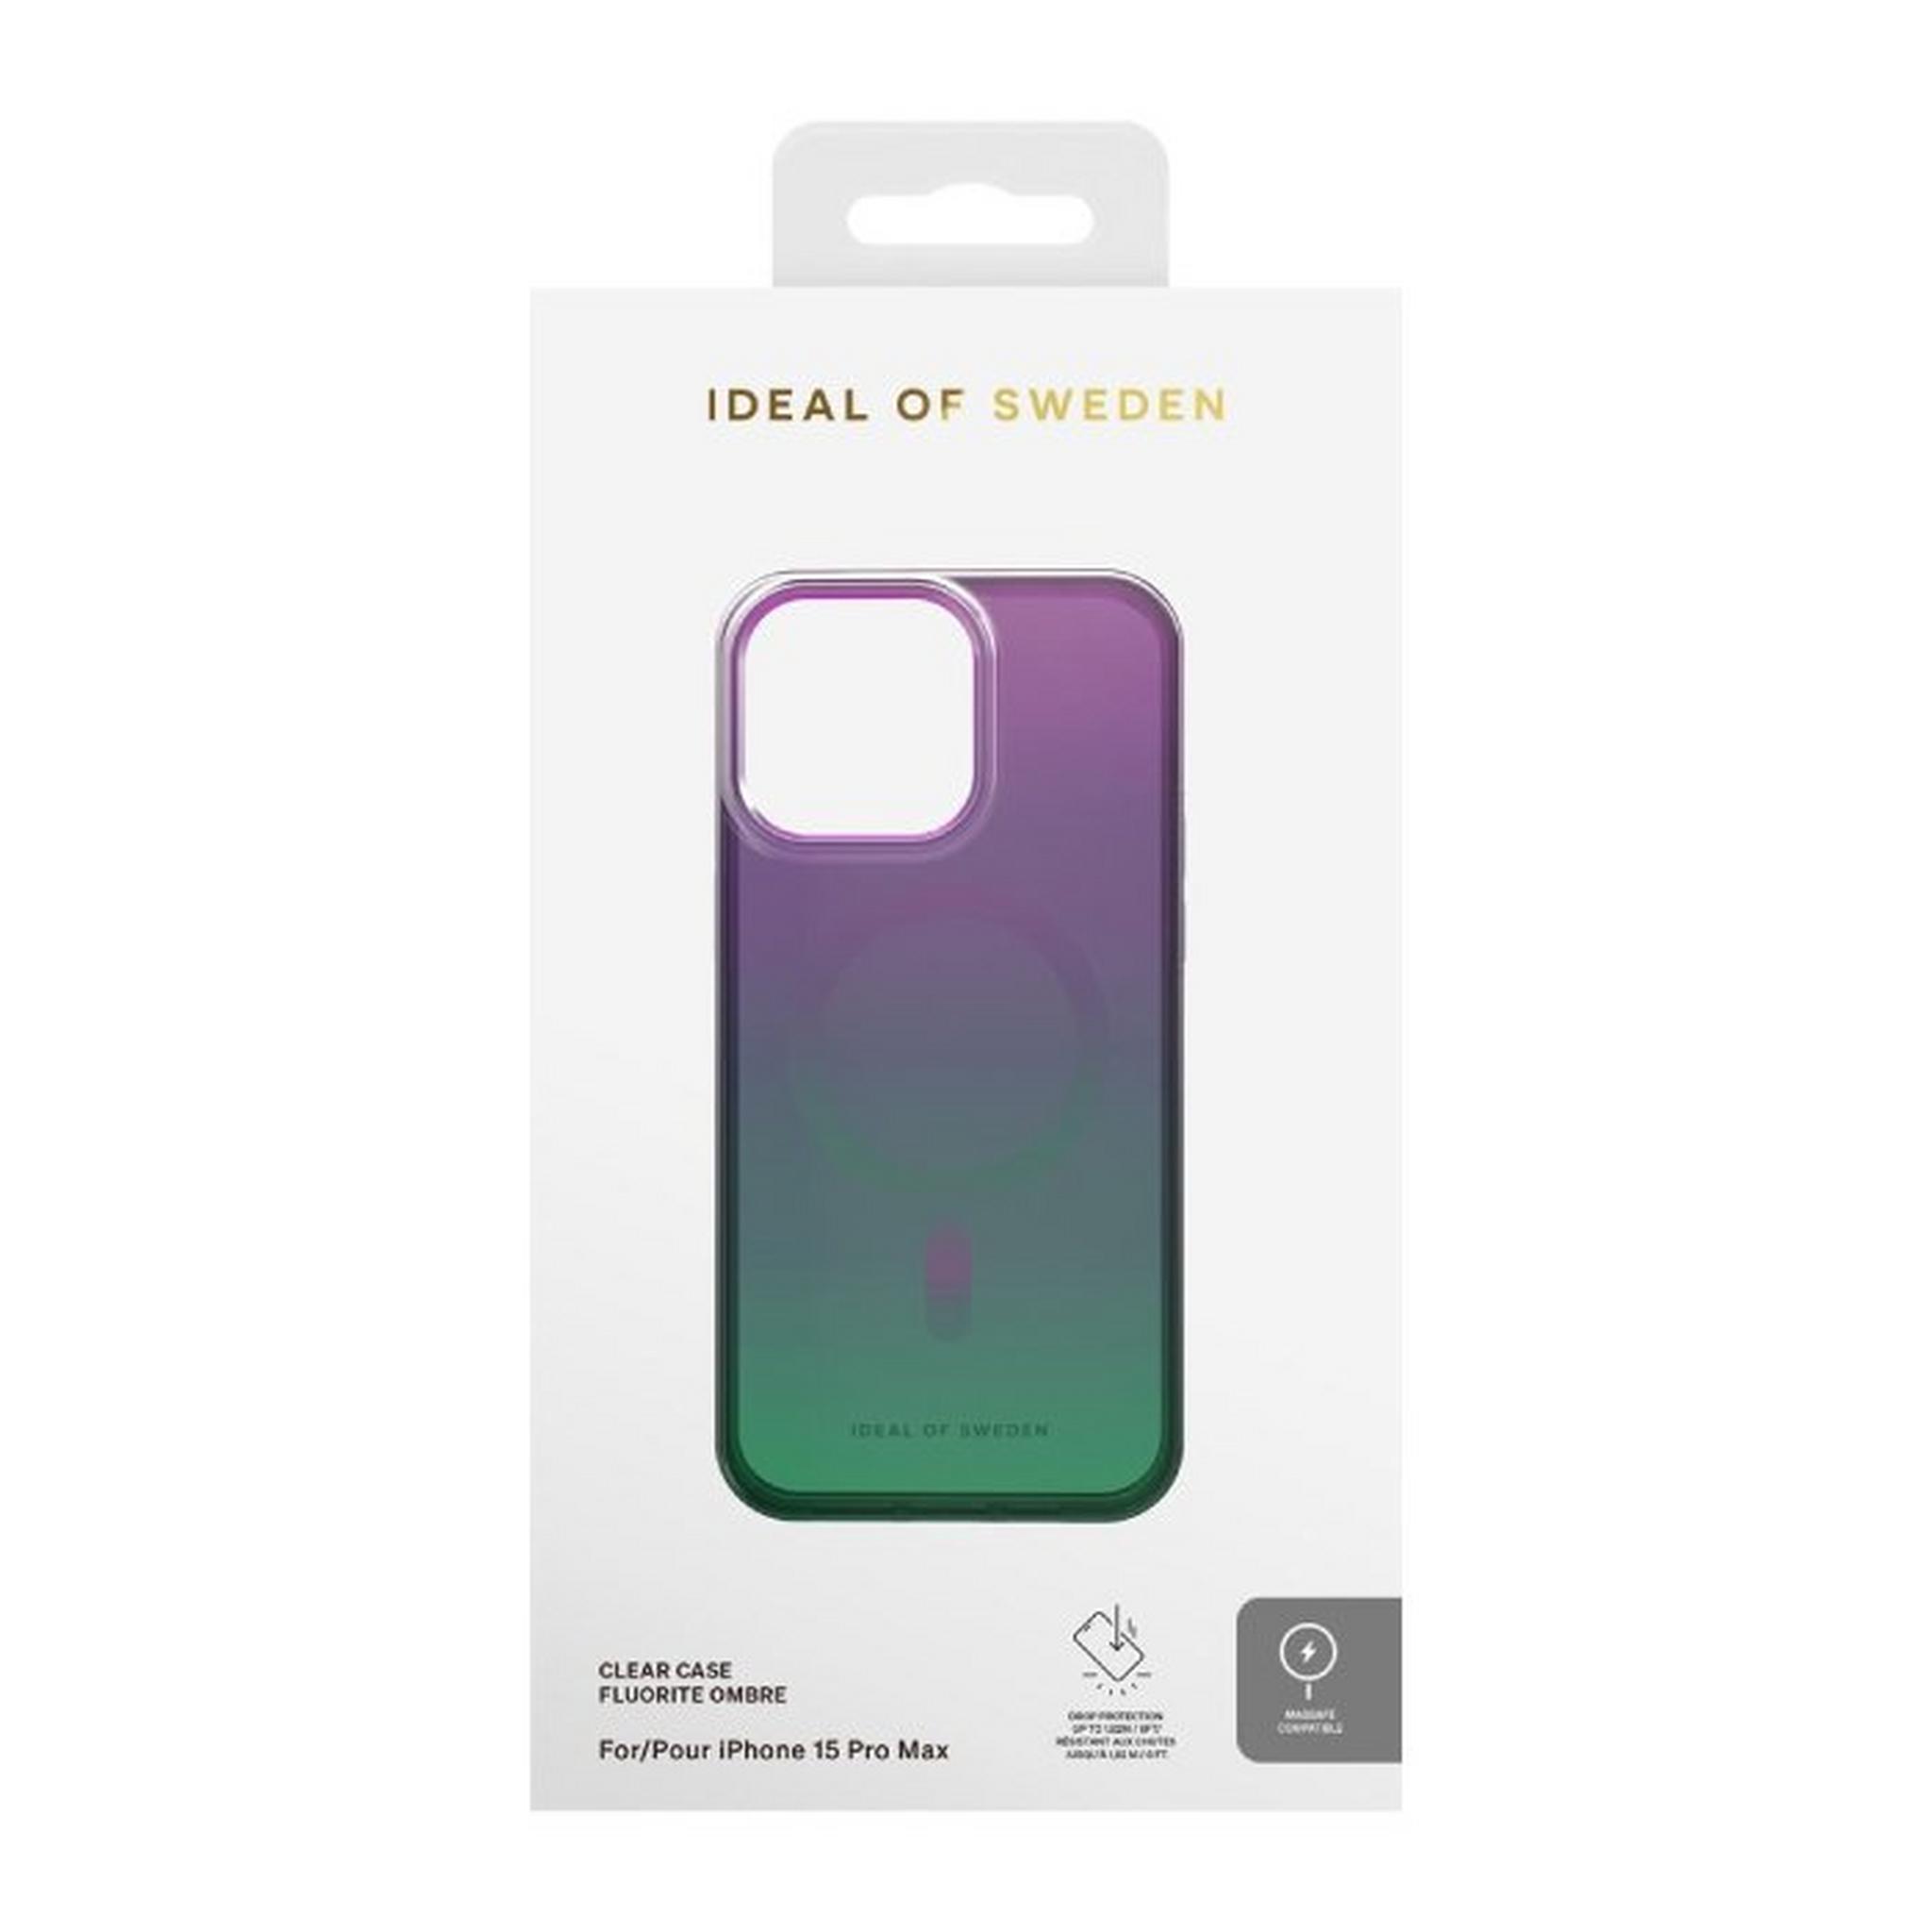 Ideal of Sweden MagSafe Case for iPhone 15 Pro Max - Fluorite Ombre